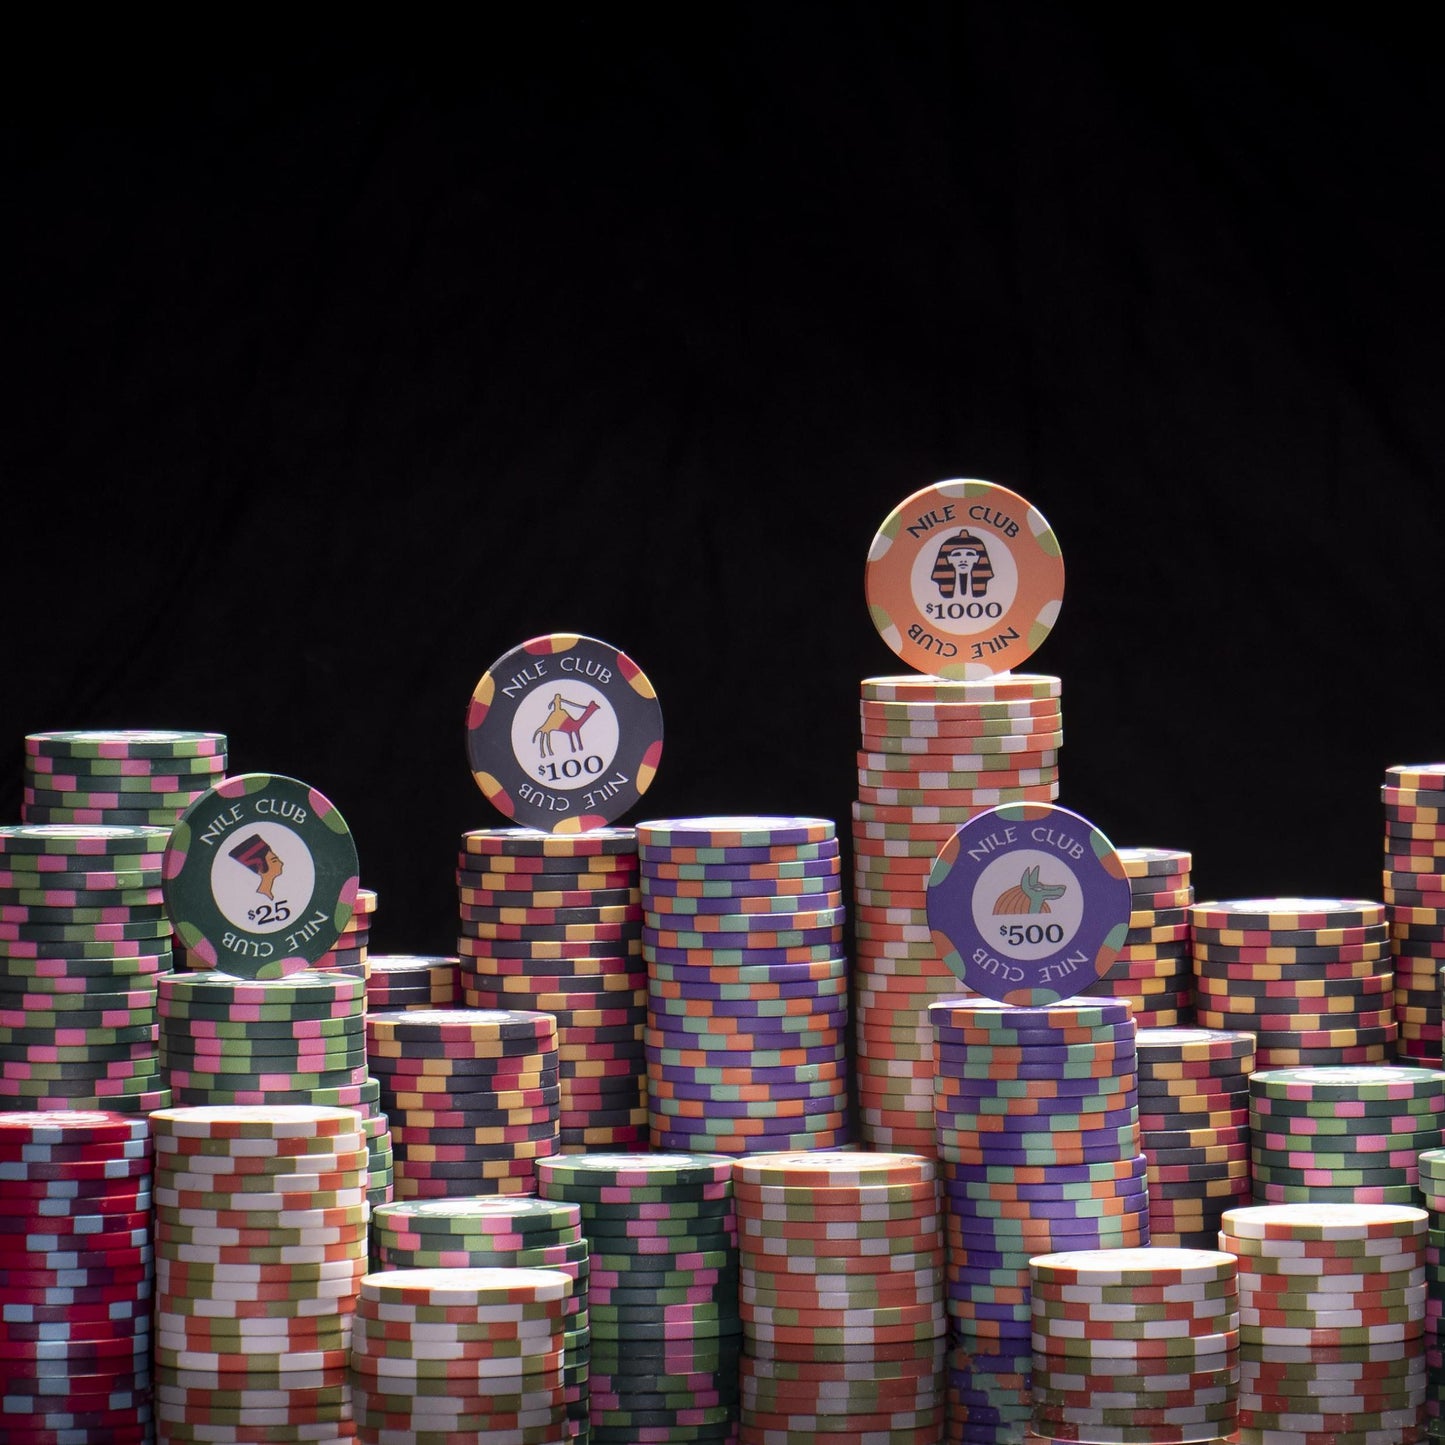 300 Nile Club Poker Chips with Wooden Carousel